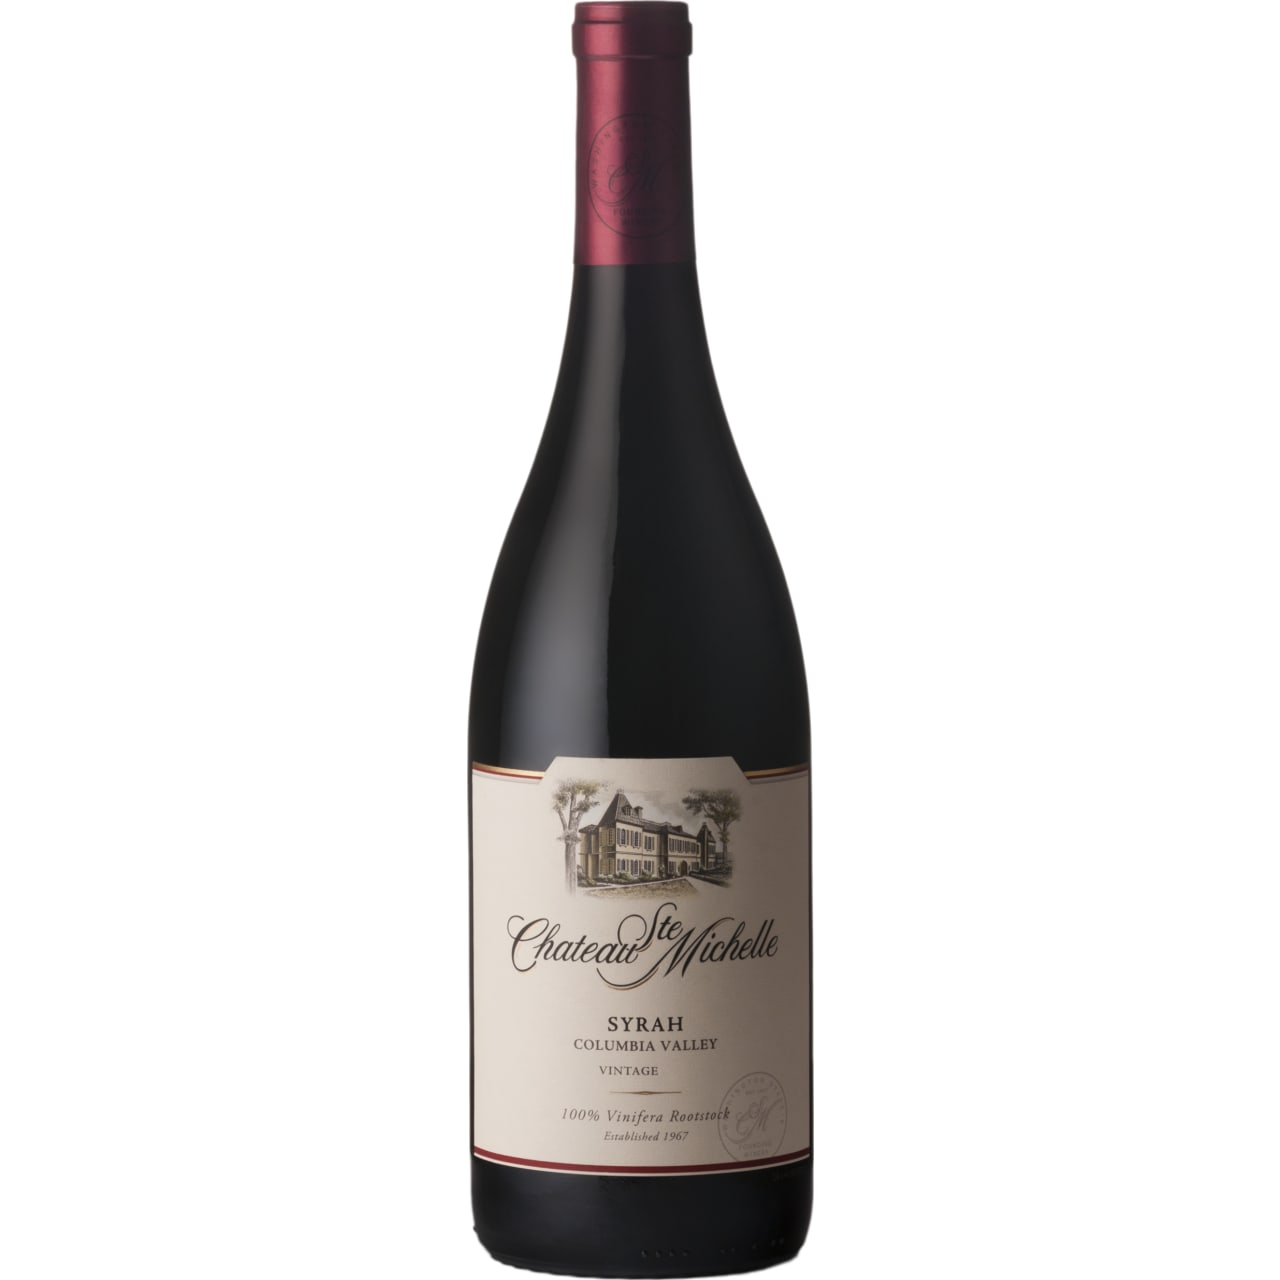 An inviting velvety texture, brimming with red and dark berry flavours.